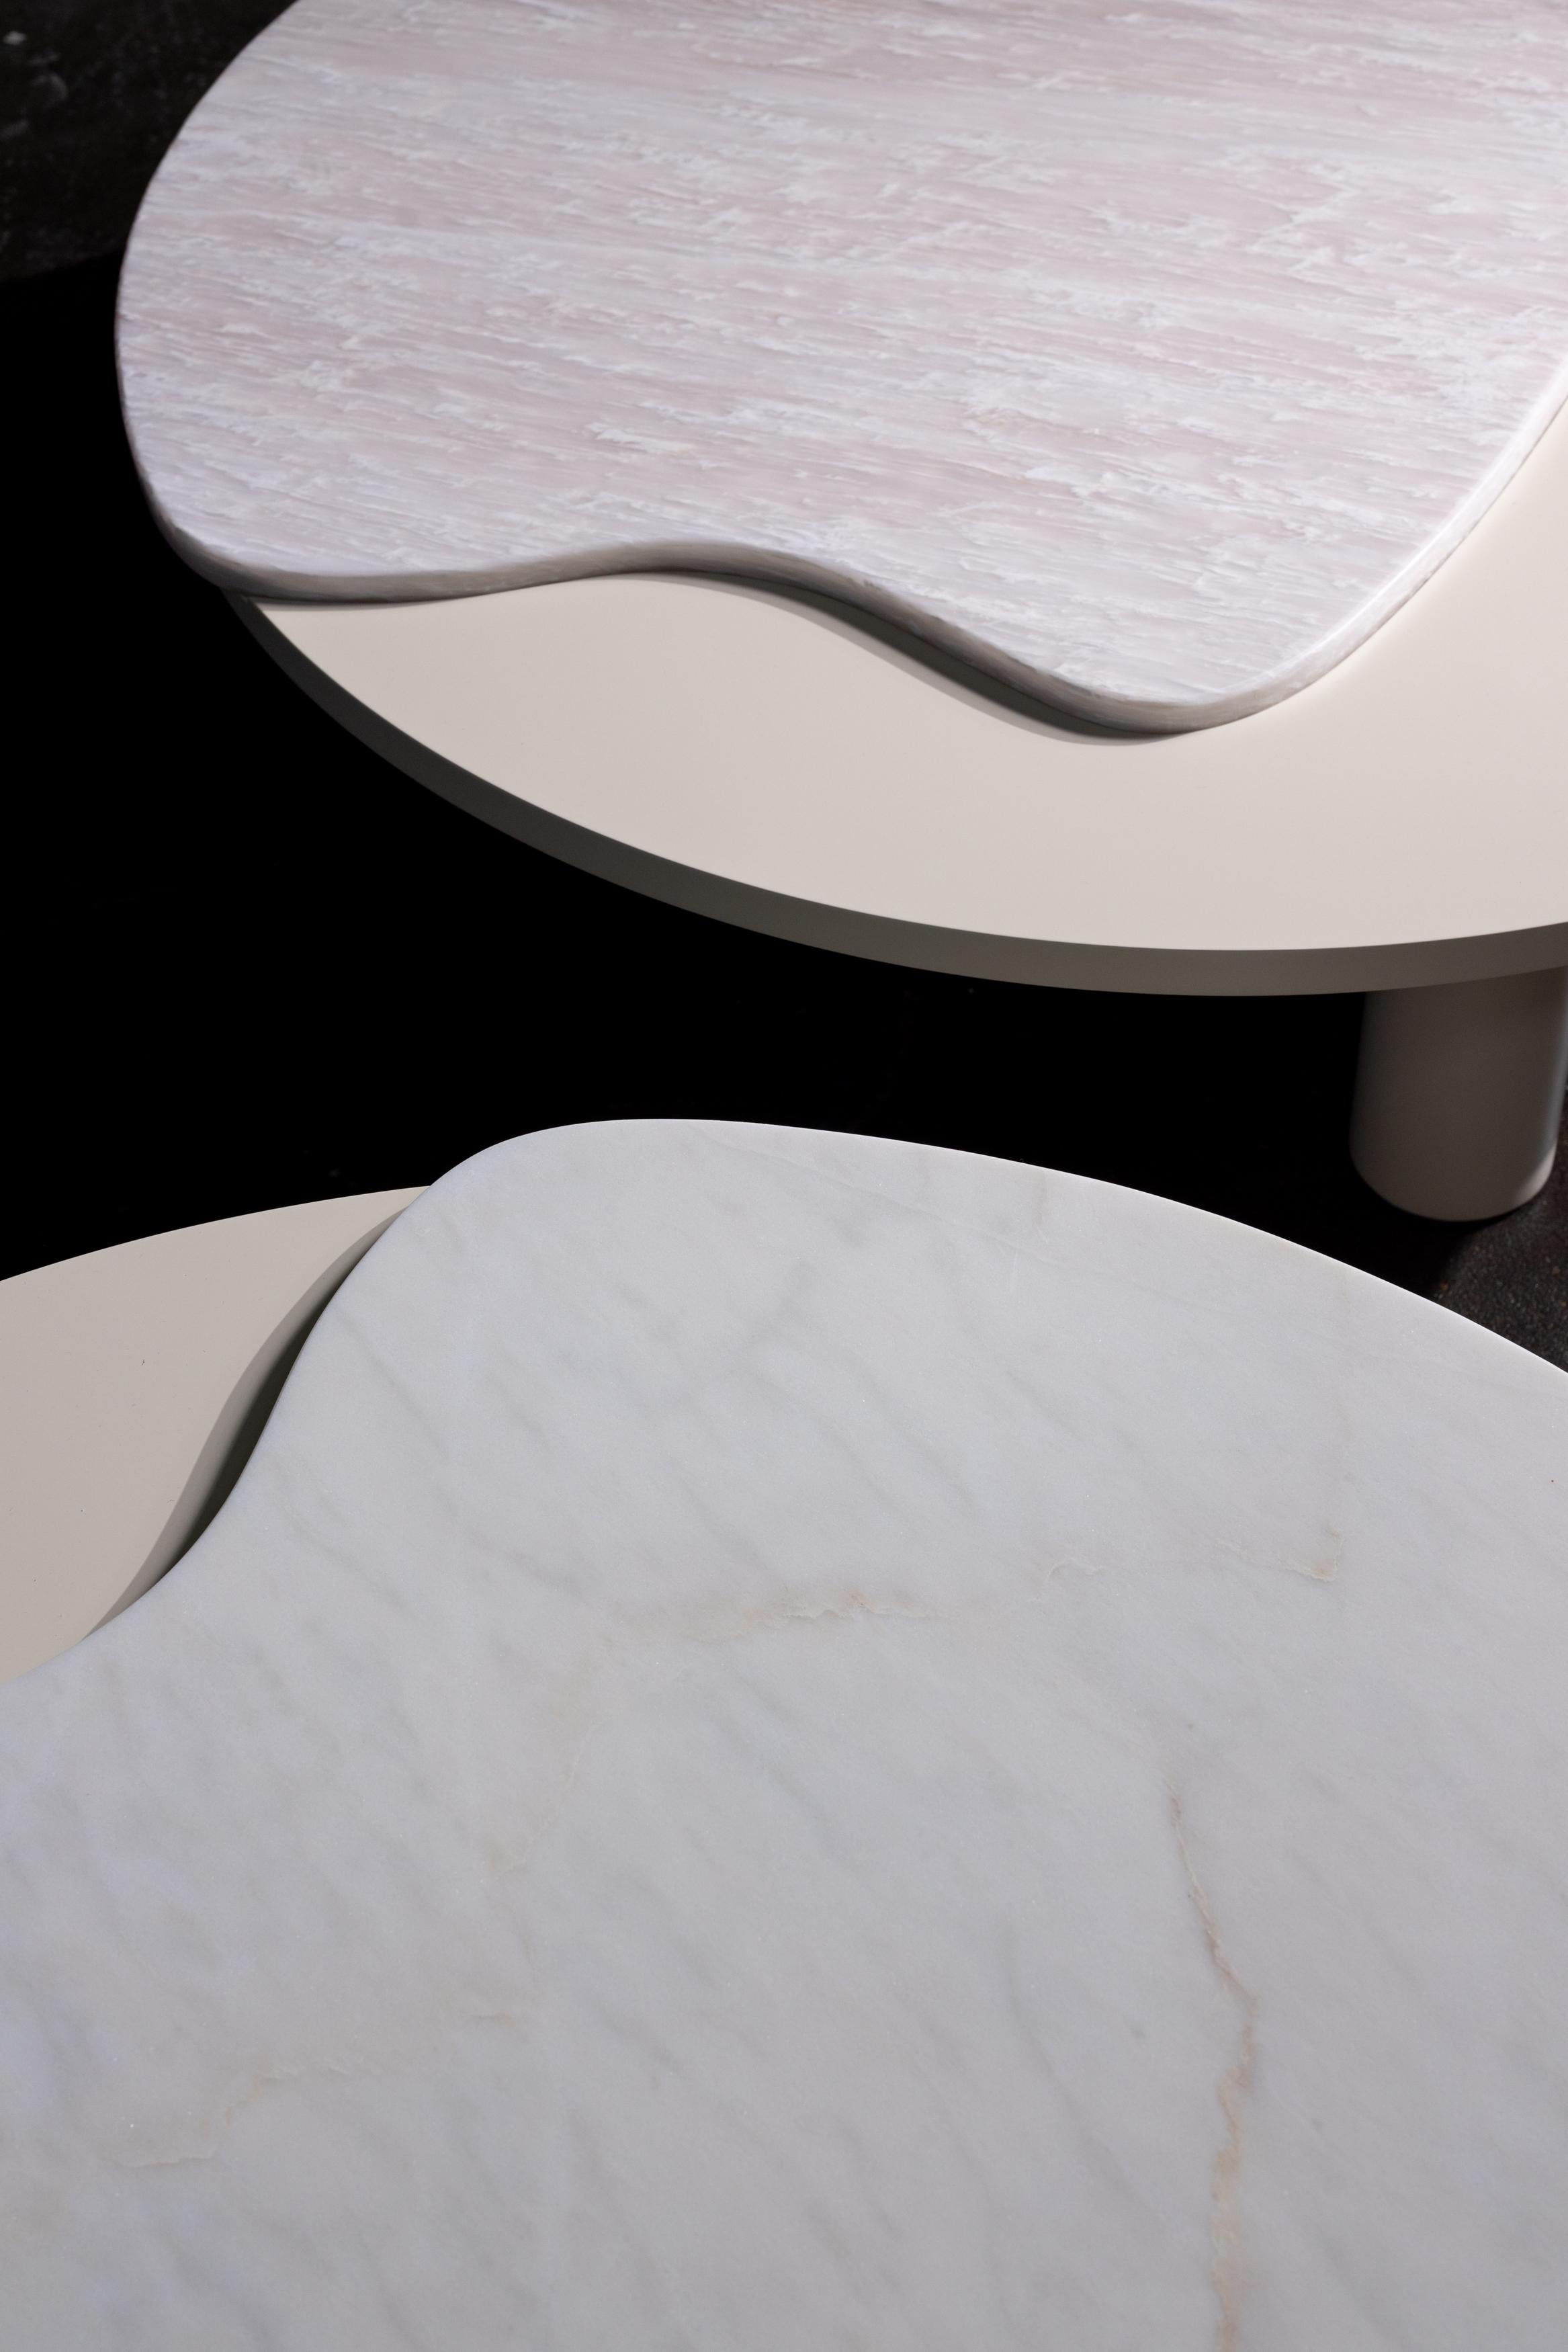 Organic Modern Bordeira Coffee Tables Marble Handmade in Portugal by Greenapple For Sale 3